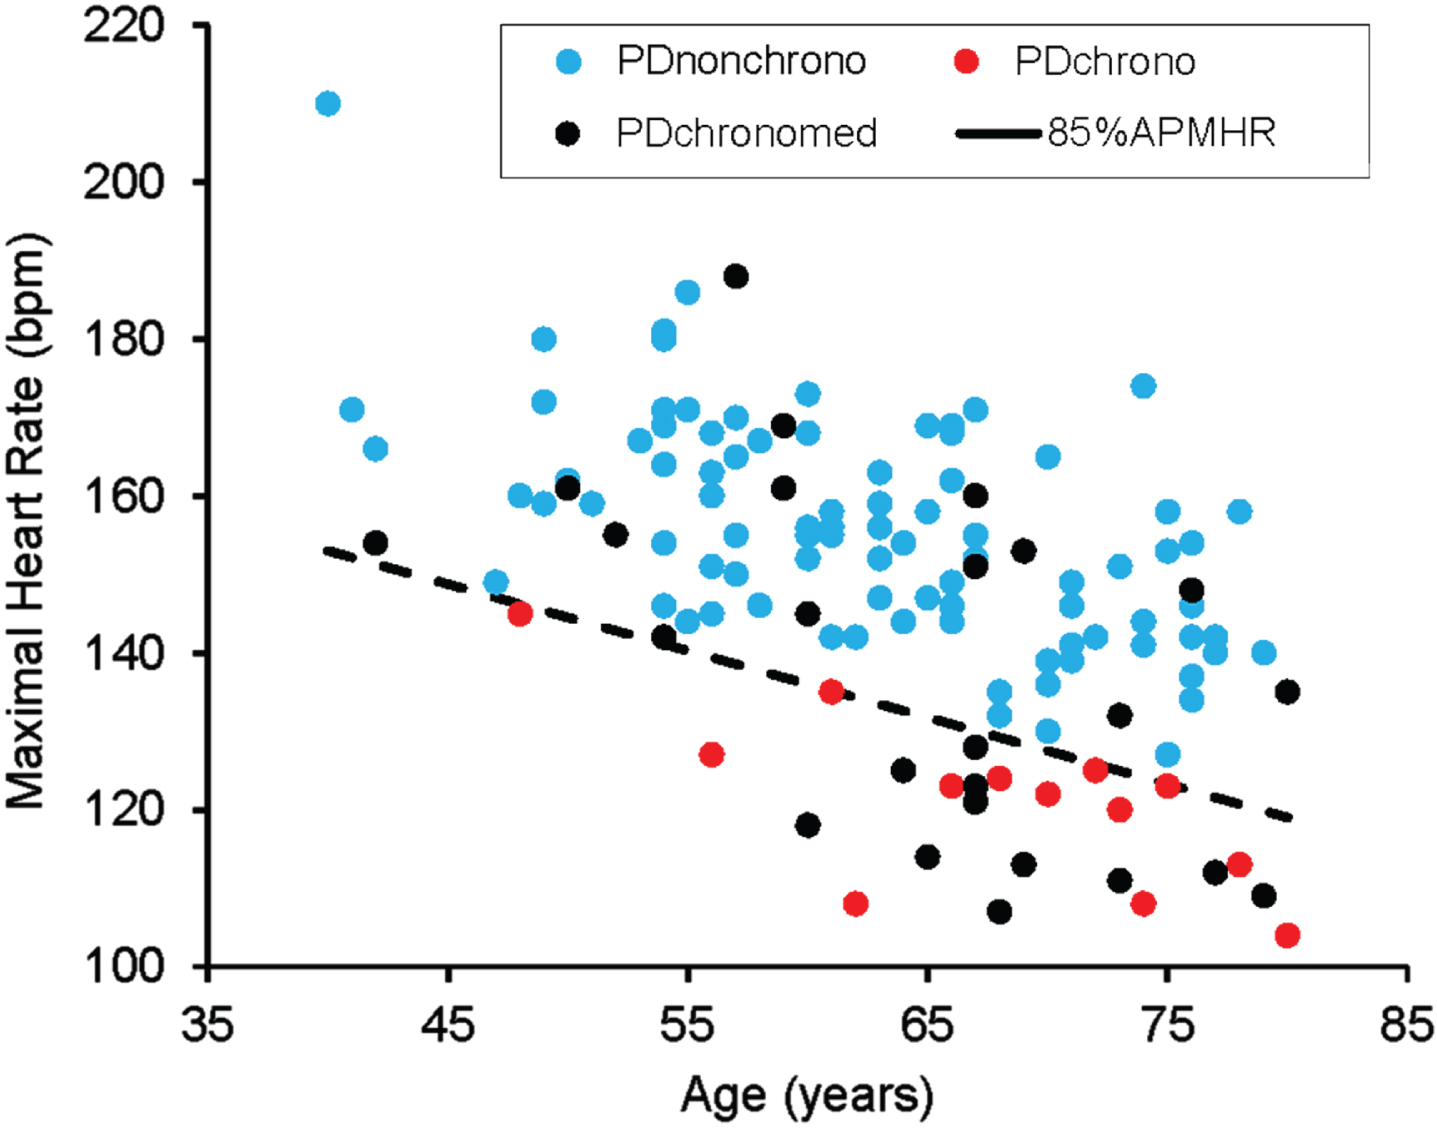 Association between age and maximal heart rate during CPET in SPARX by chronotropic group. PDnon-chrono (n = 90), PDchrono (n = 13), and PDchronomed (n = 25).